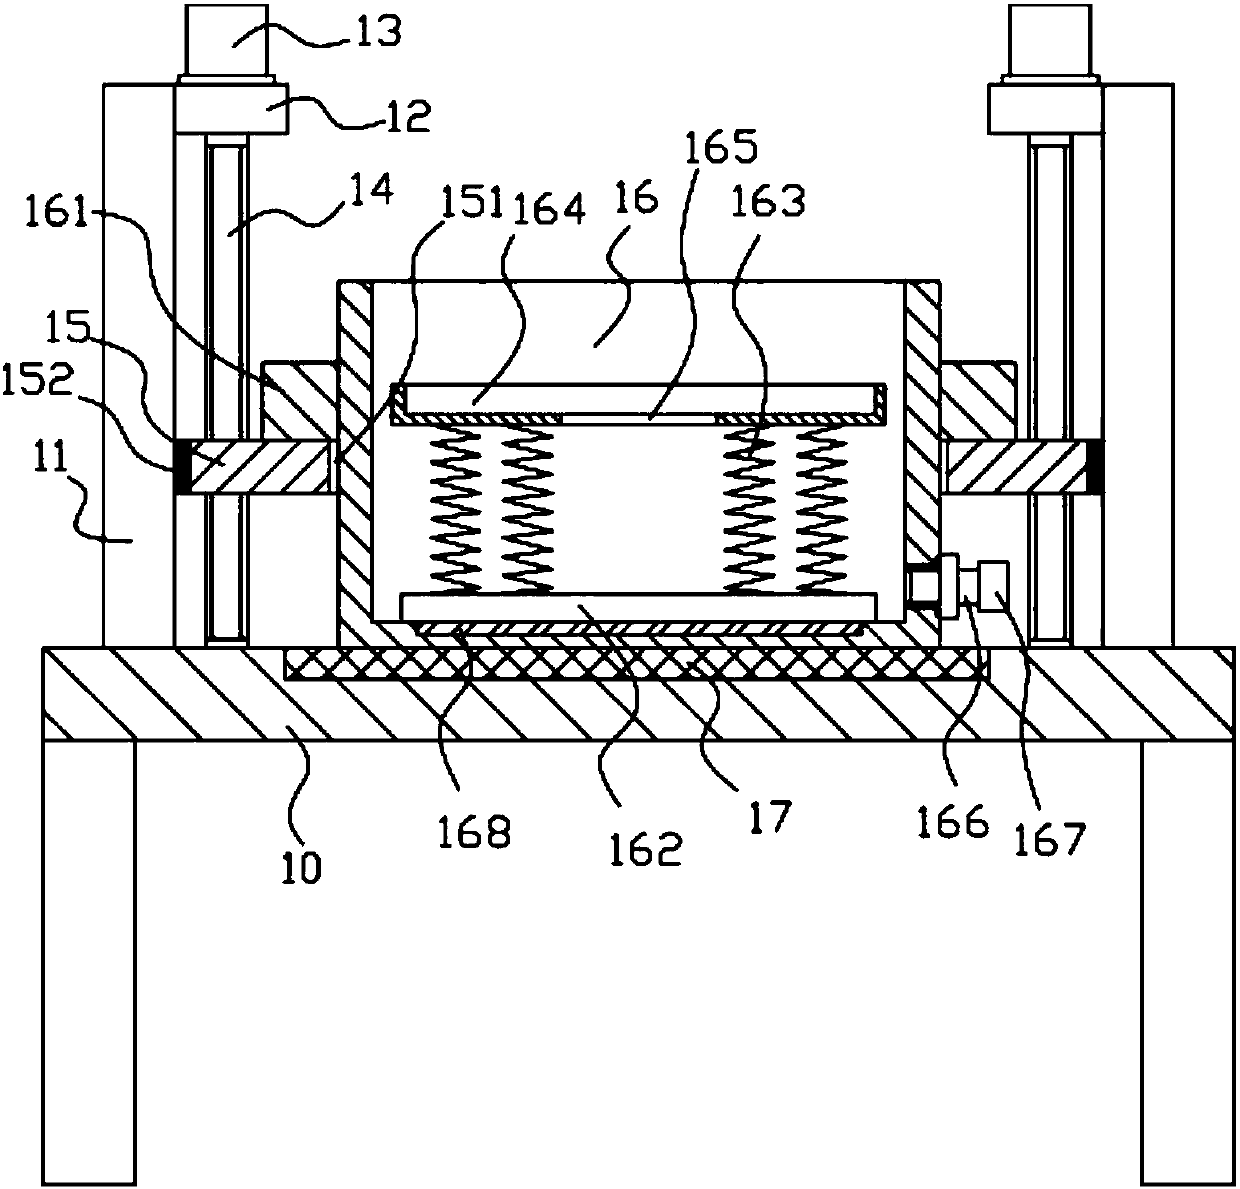 Liftable oil barrel mechanism for oil immersion of parts